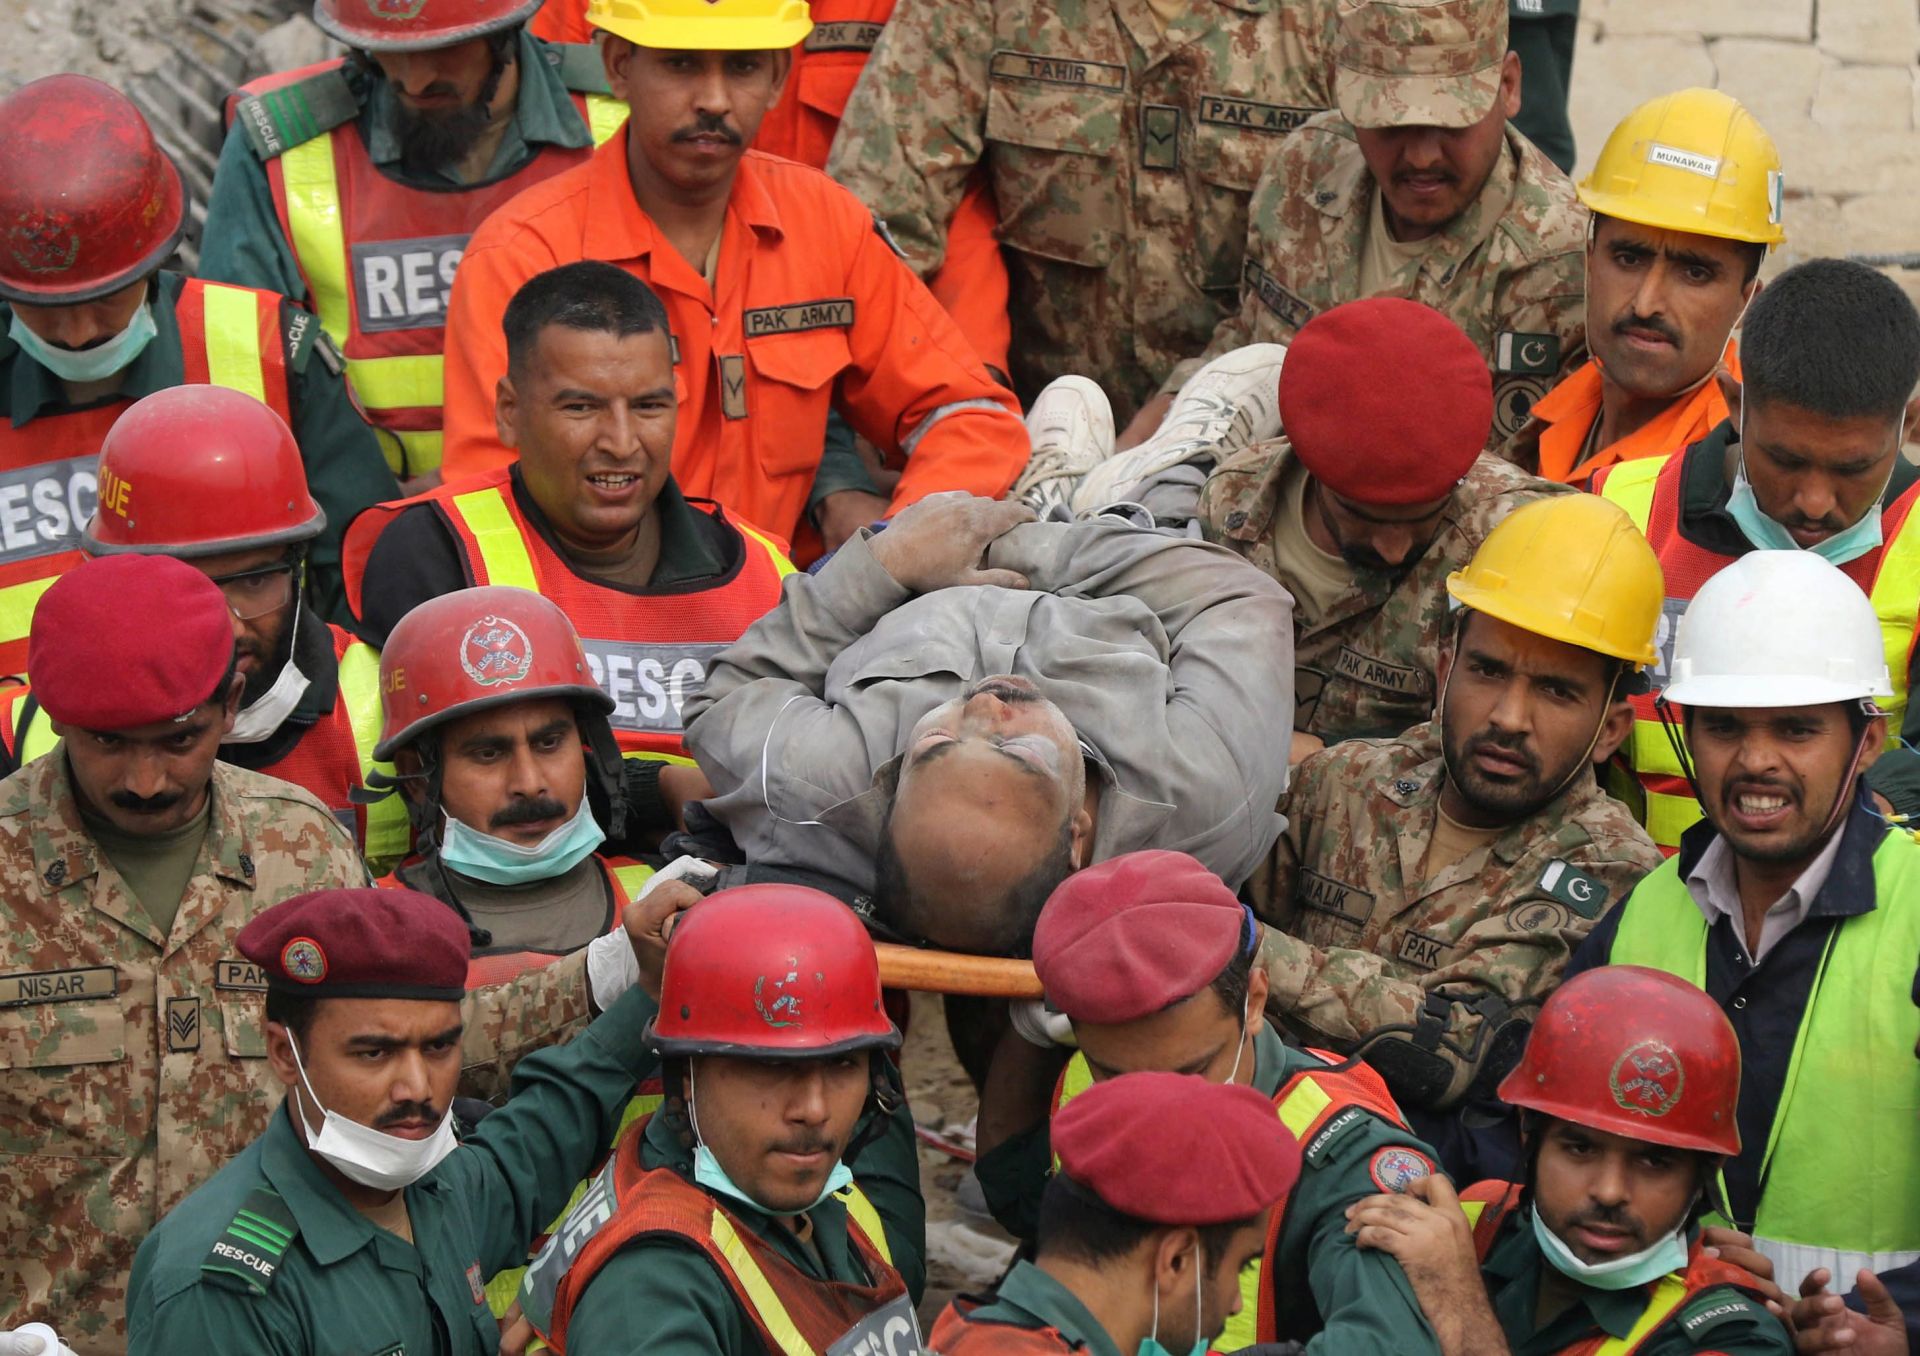 epa05011730 Rescue workers recover a body amid rubble of a factory that collapsed in Lahore, Pakistan, 05 November 2015. The roof of a multi-storey factory collapsed in Pakistan on 04 November, killing at least 19 workers and leaving about 150 trapped under the rubble, officials said. Rescuers were cutting through steel bars to look for survivors in an industrial district of the eastern city of Lahore, police official Haider Ashraf said.  EPA/RAHAT DAR